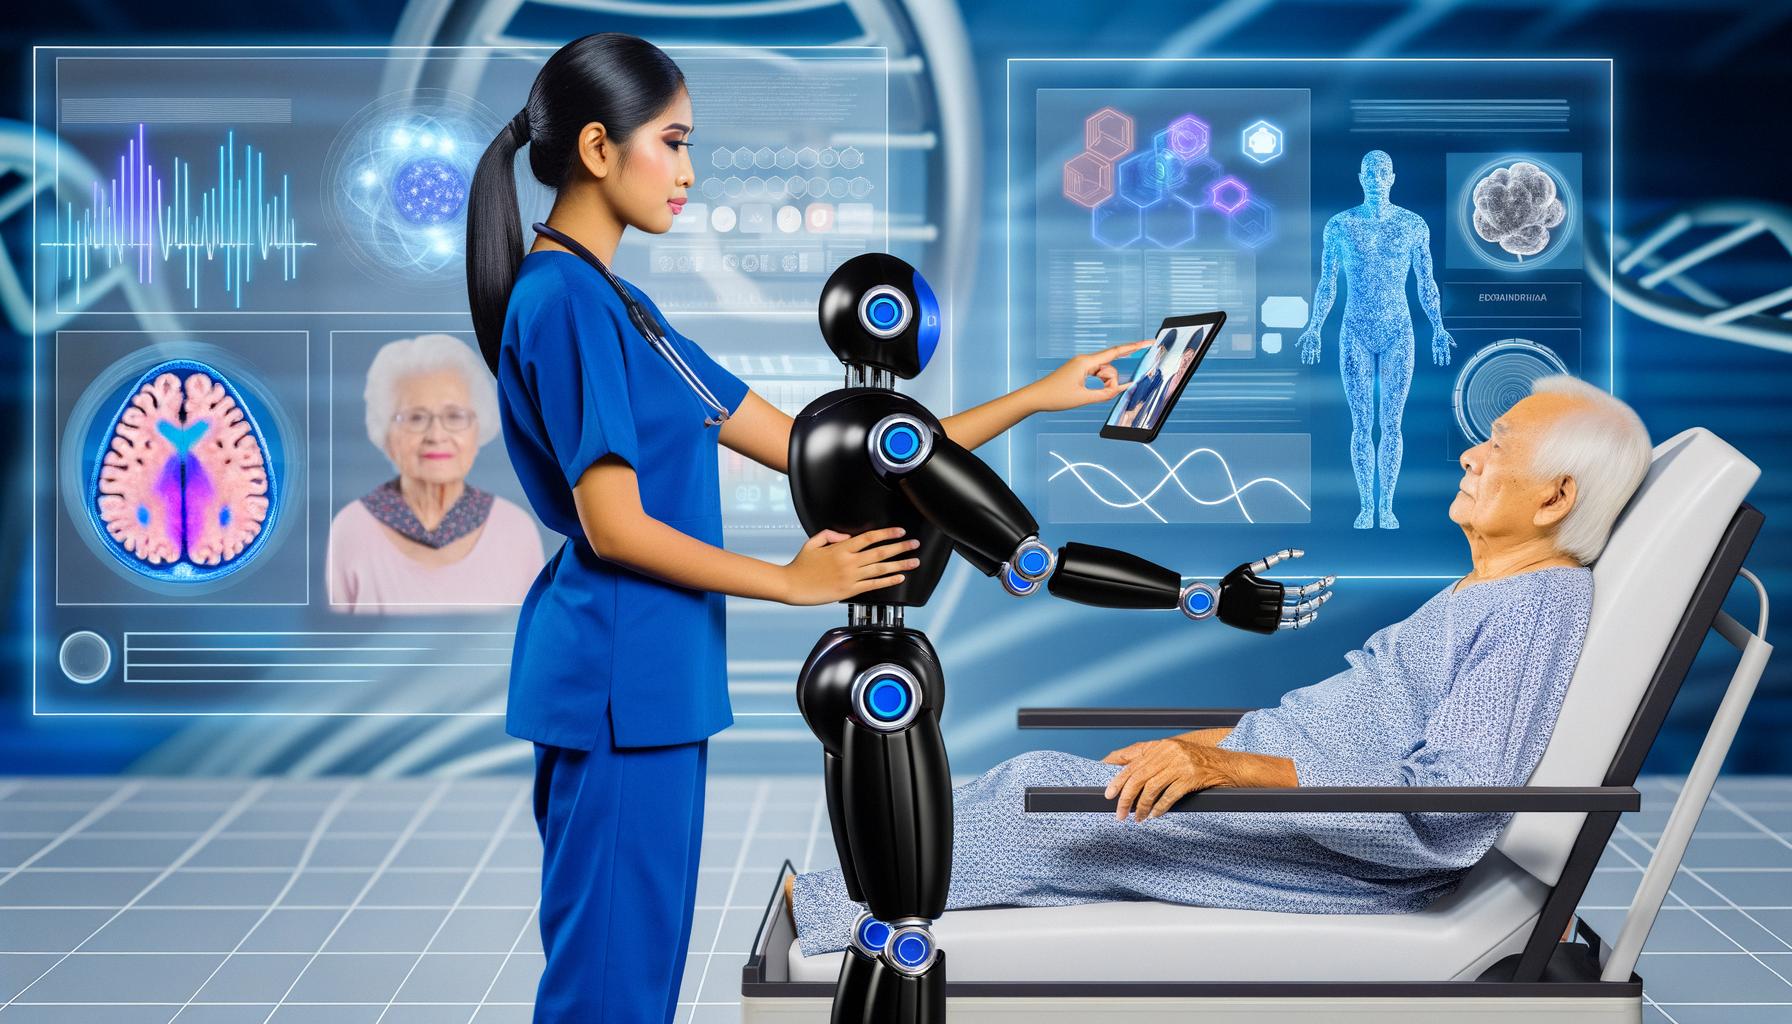 AI and digital technology are significantly transforming healthcare delivery and outcomes.